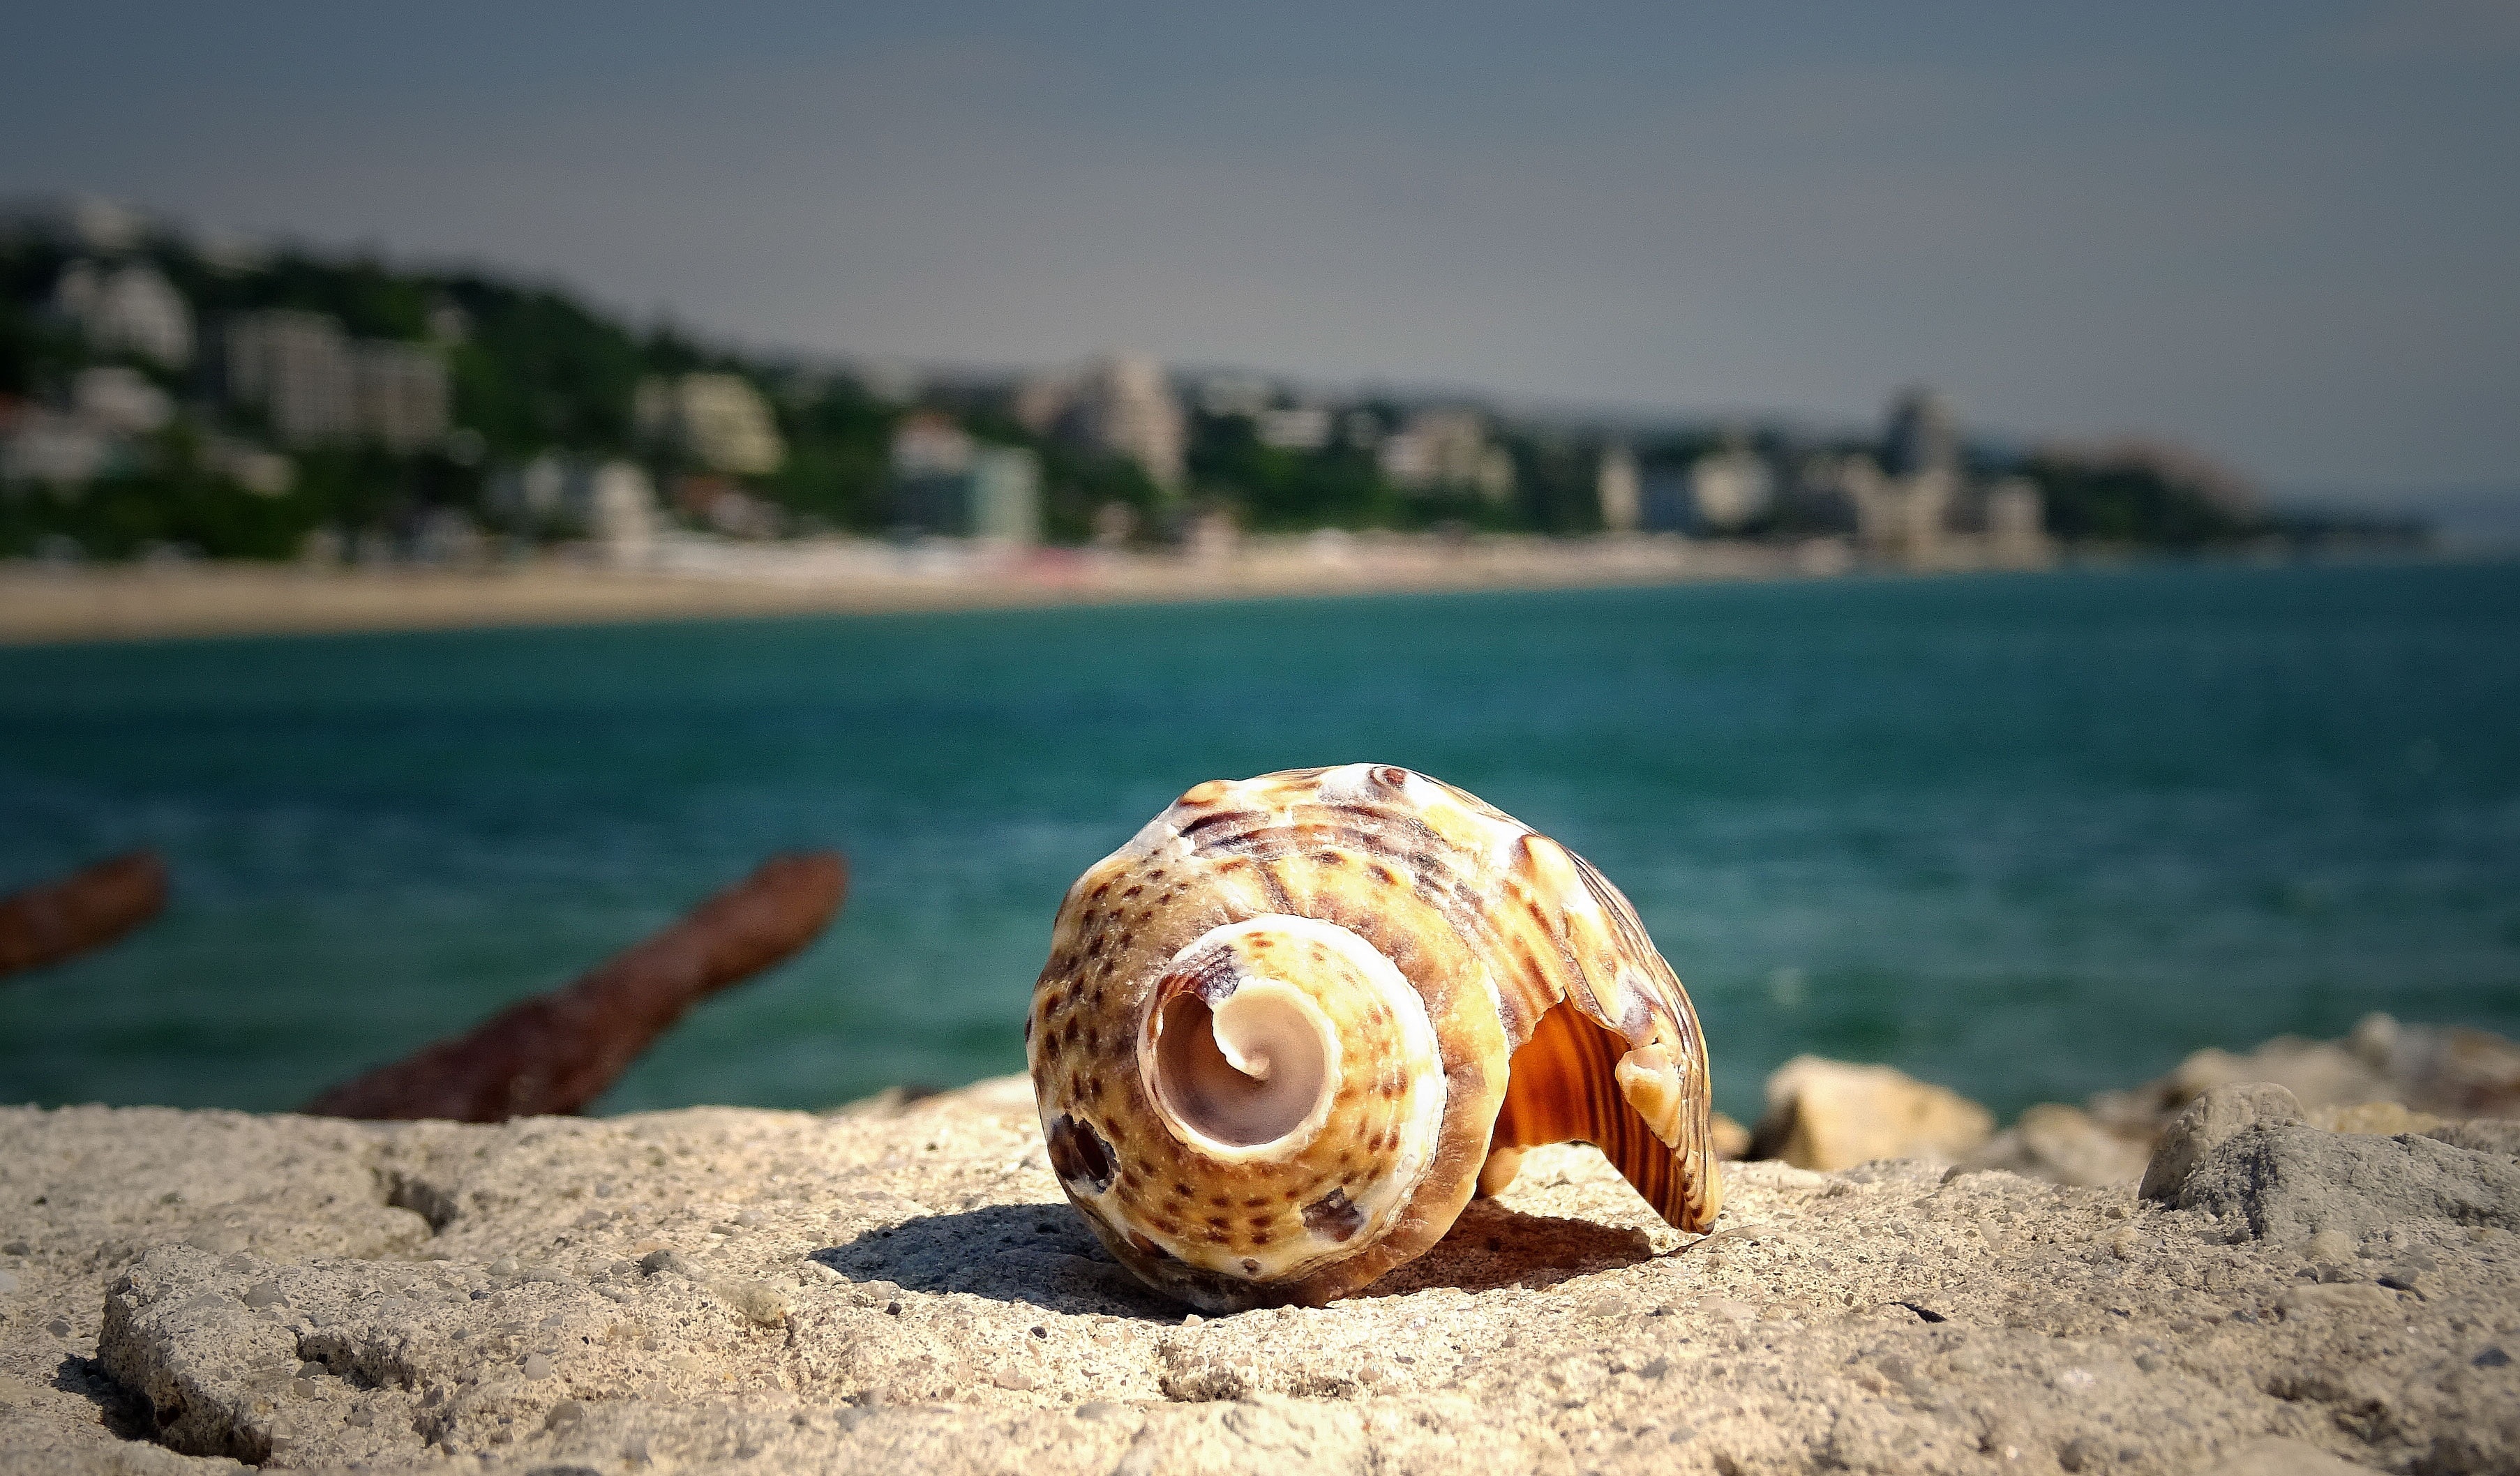 shell near body of water during daytime